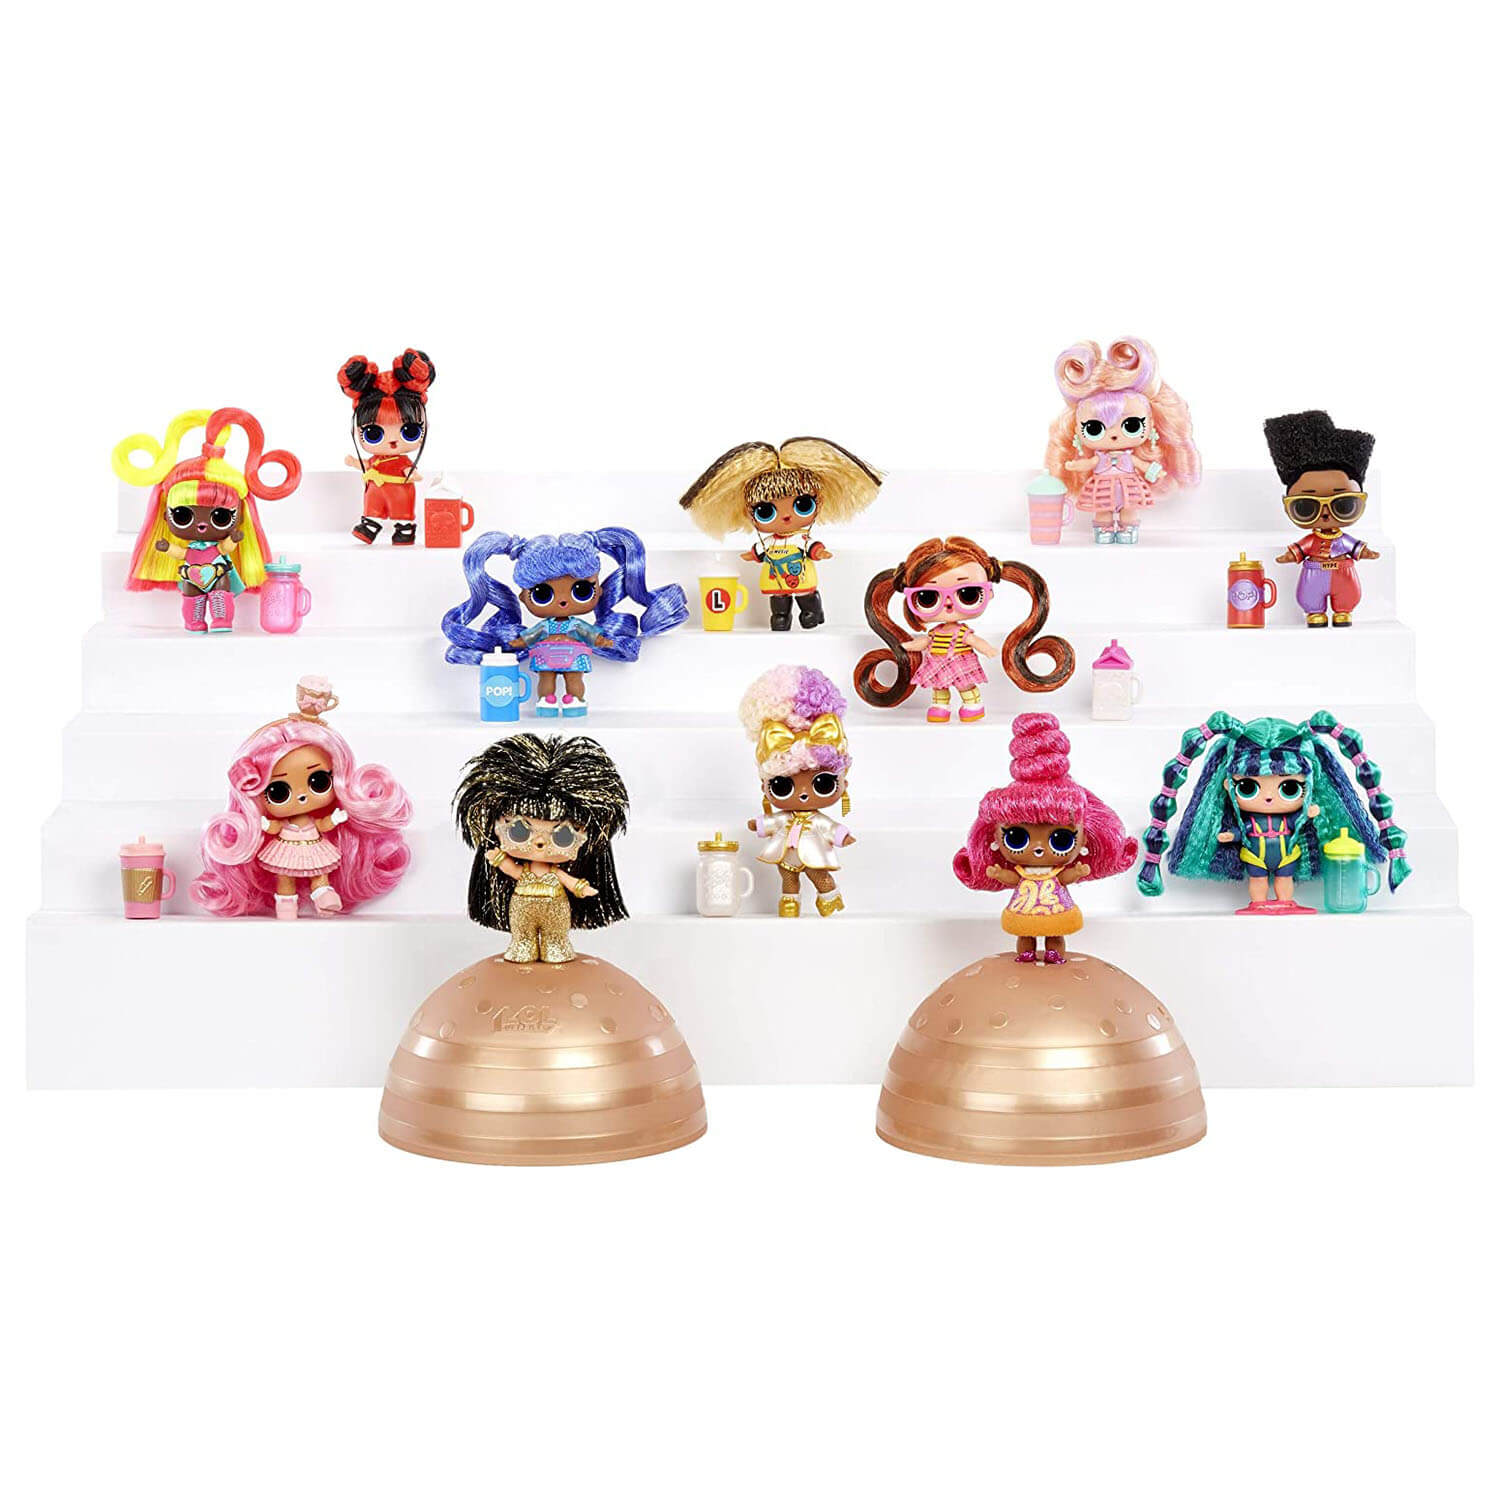 Front view of the L.O.L. figures.